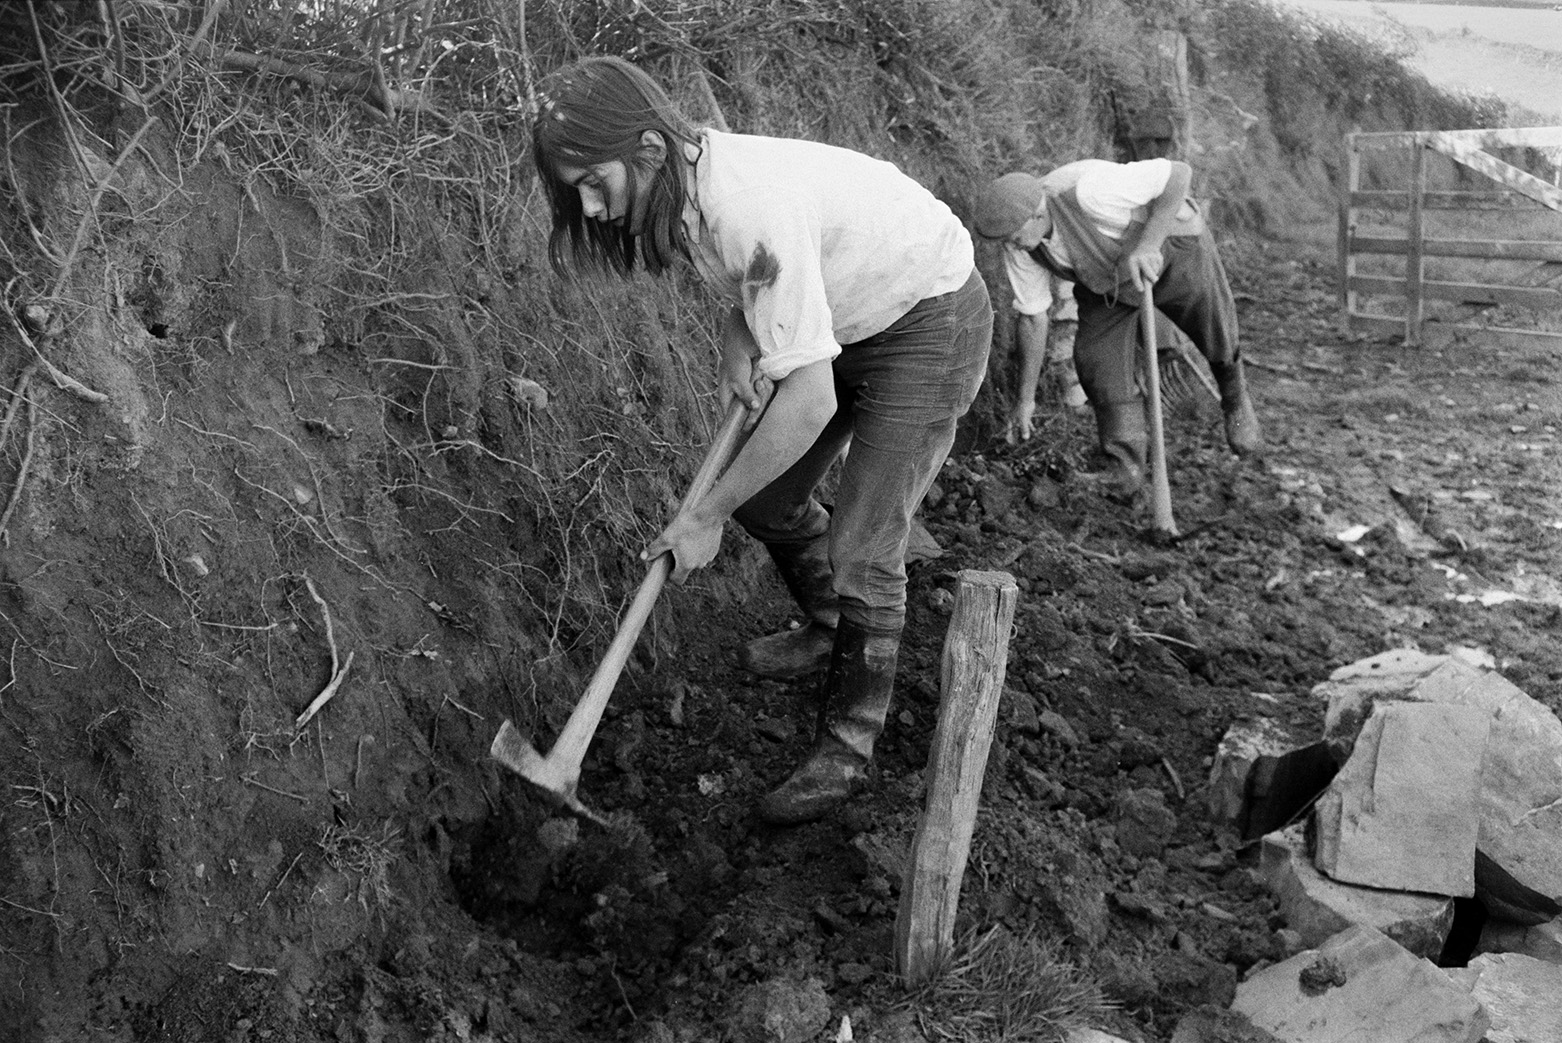 Derek Bright, in the foreground, helping Tom Hooper clear a hedge bank and build a stone wall to support, in a field at Mill Road Farm, Beaford. They are using axes to clear the bottom of the earth bank. The farm was also known as Jeffrys.